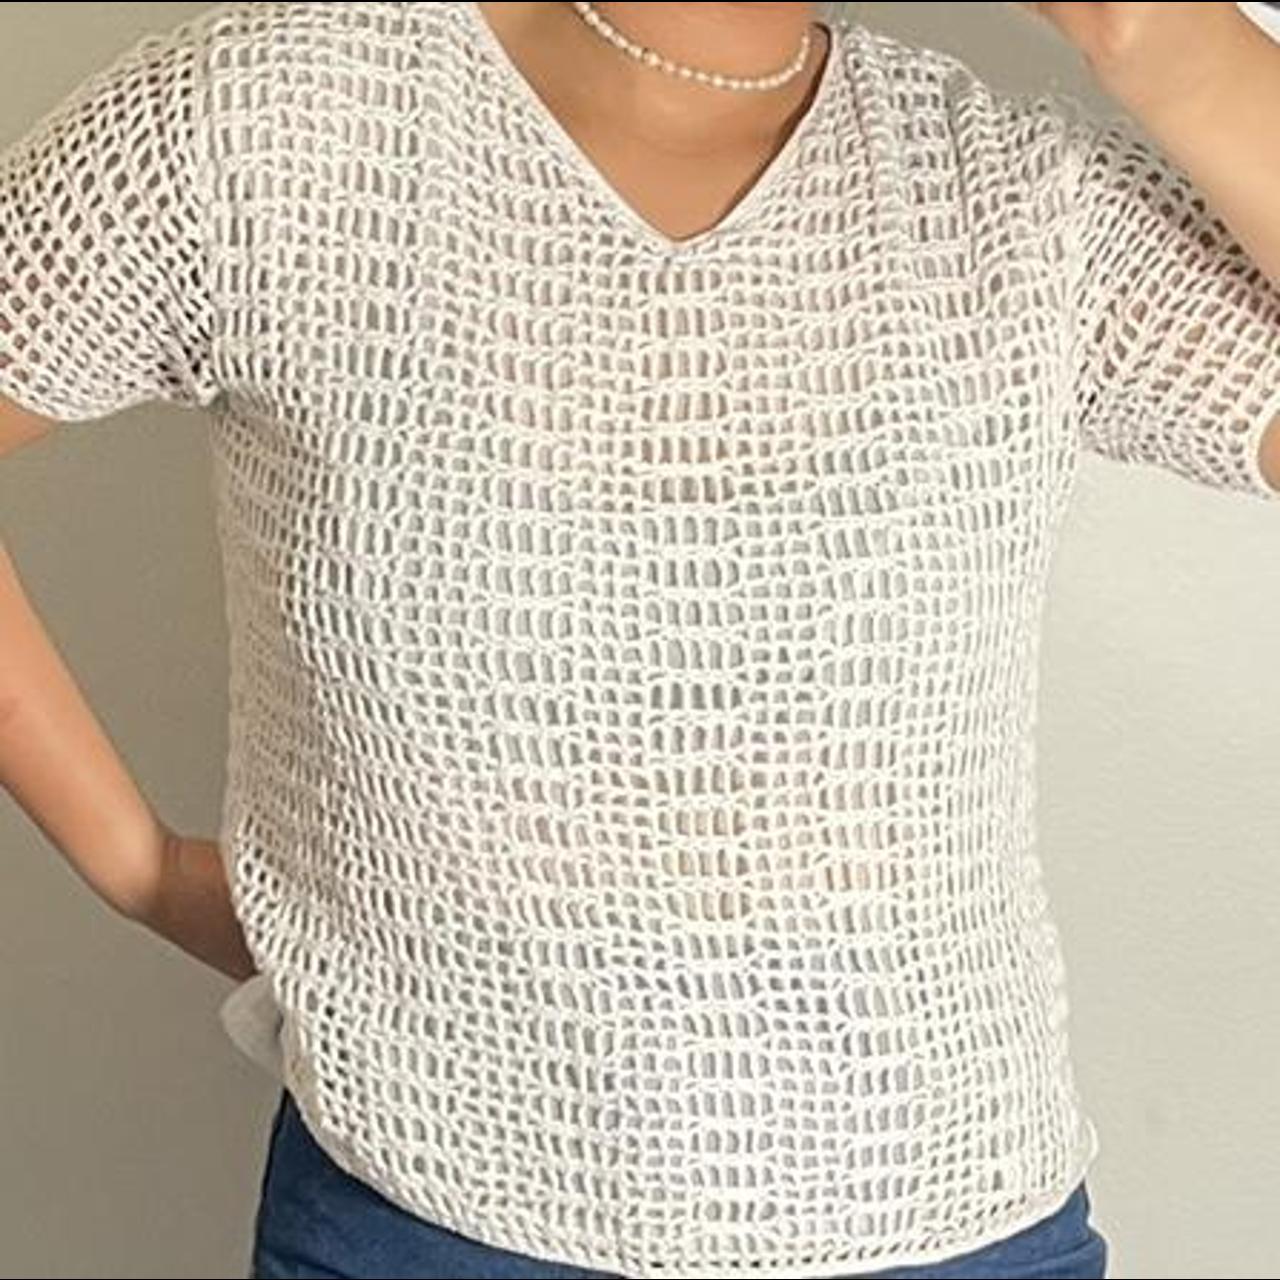 Product Image 1 - White Knit Top

It has two